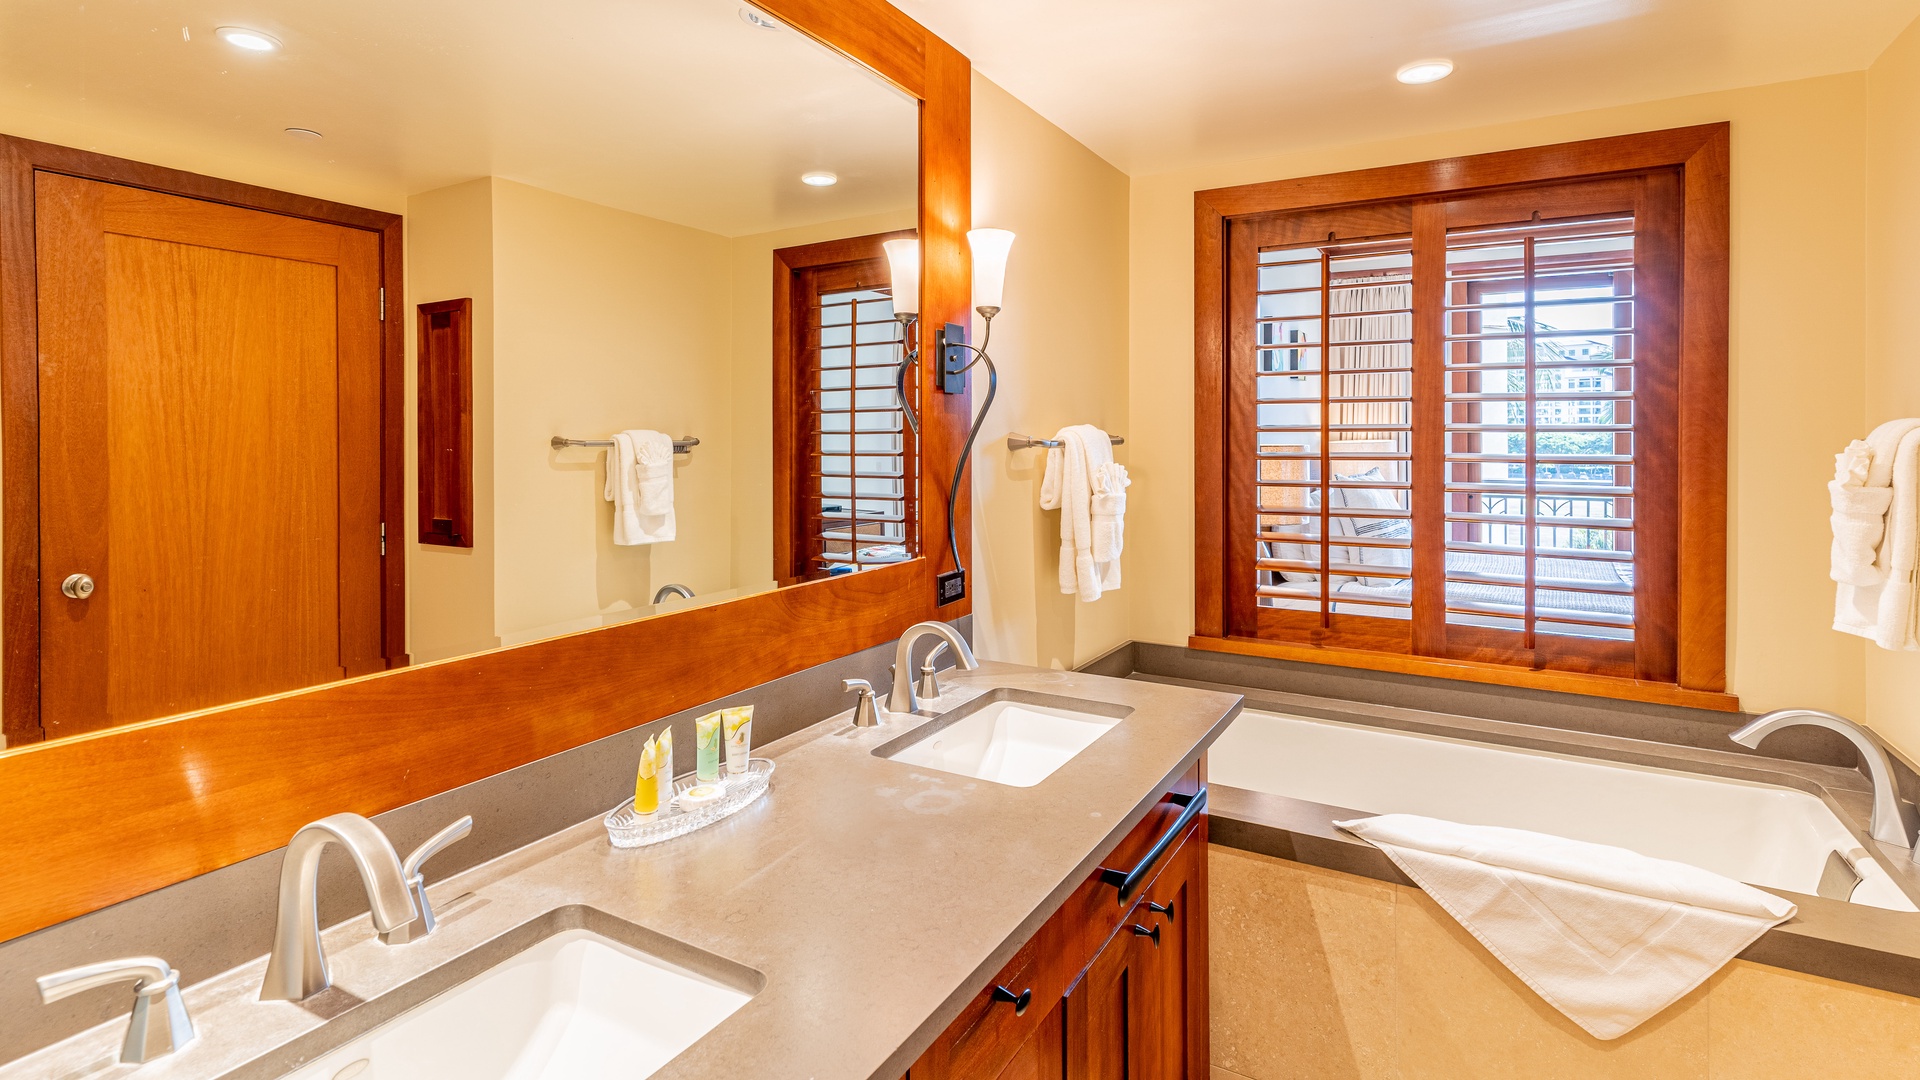 Kapolei Vacation Rentals, Ko Olina Beach Villas B403 - The primary guest bathroom with a luxurious soaking tub.